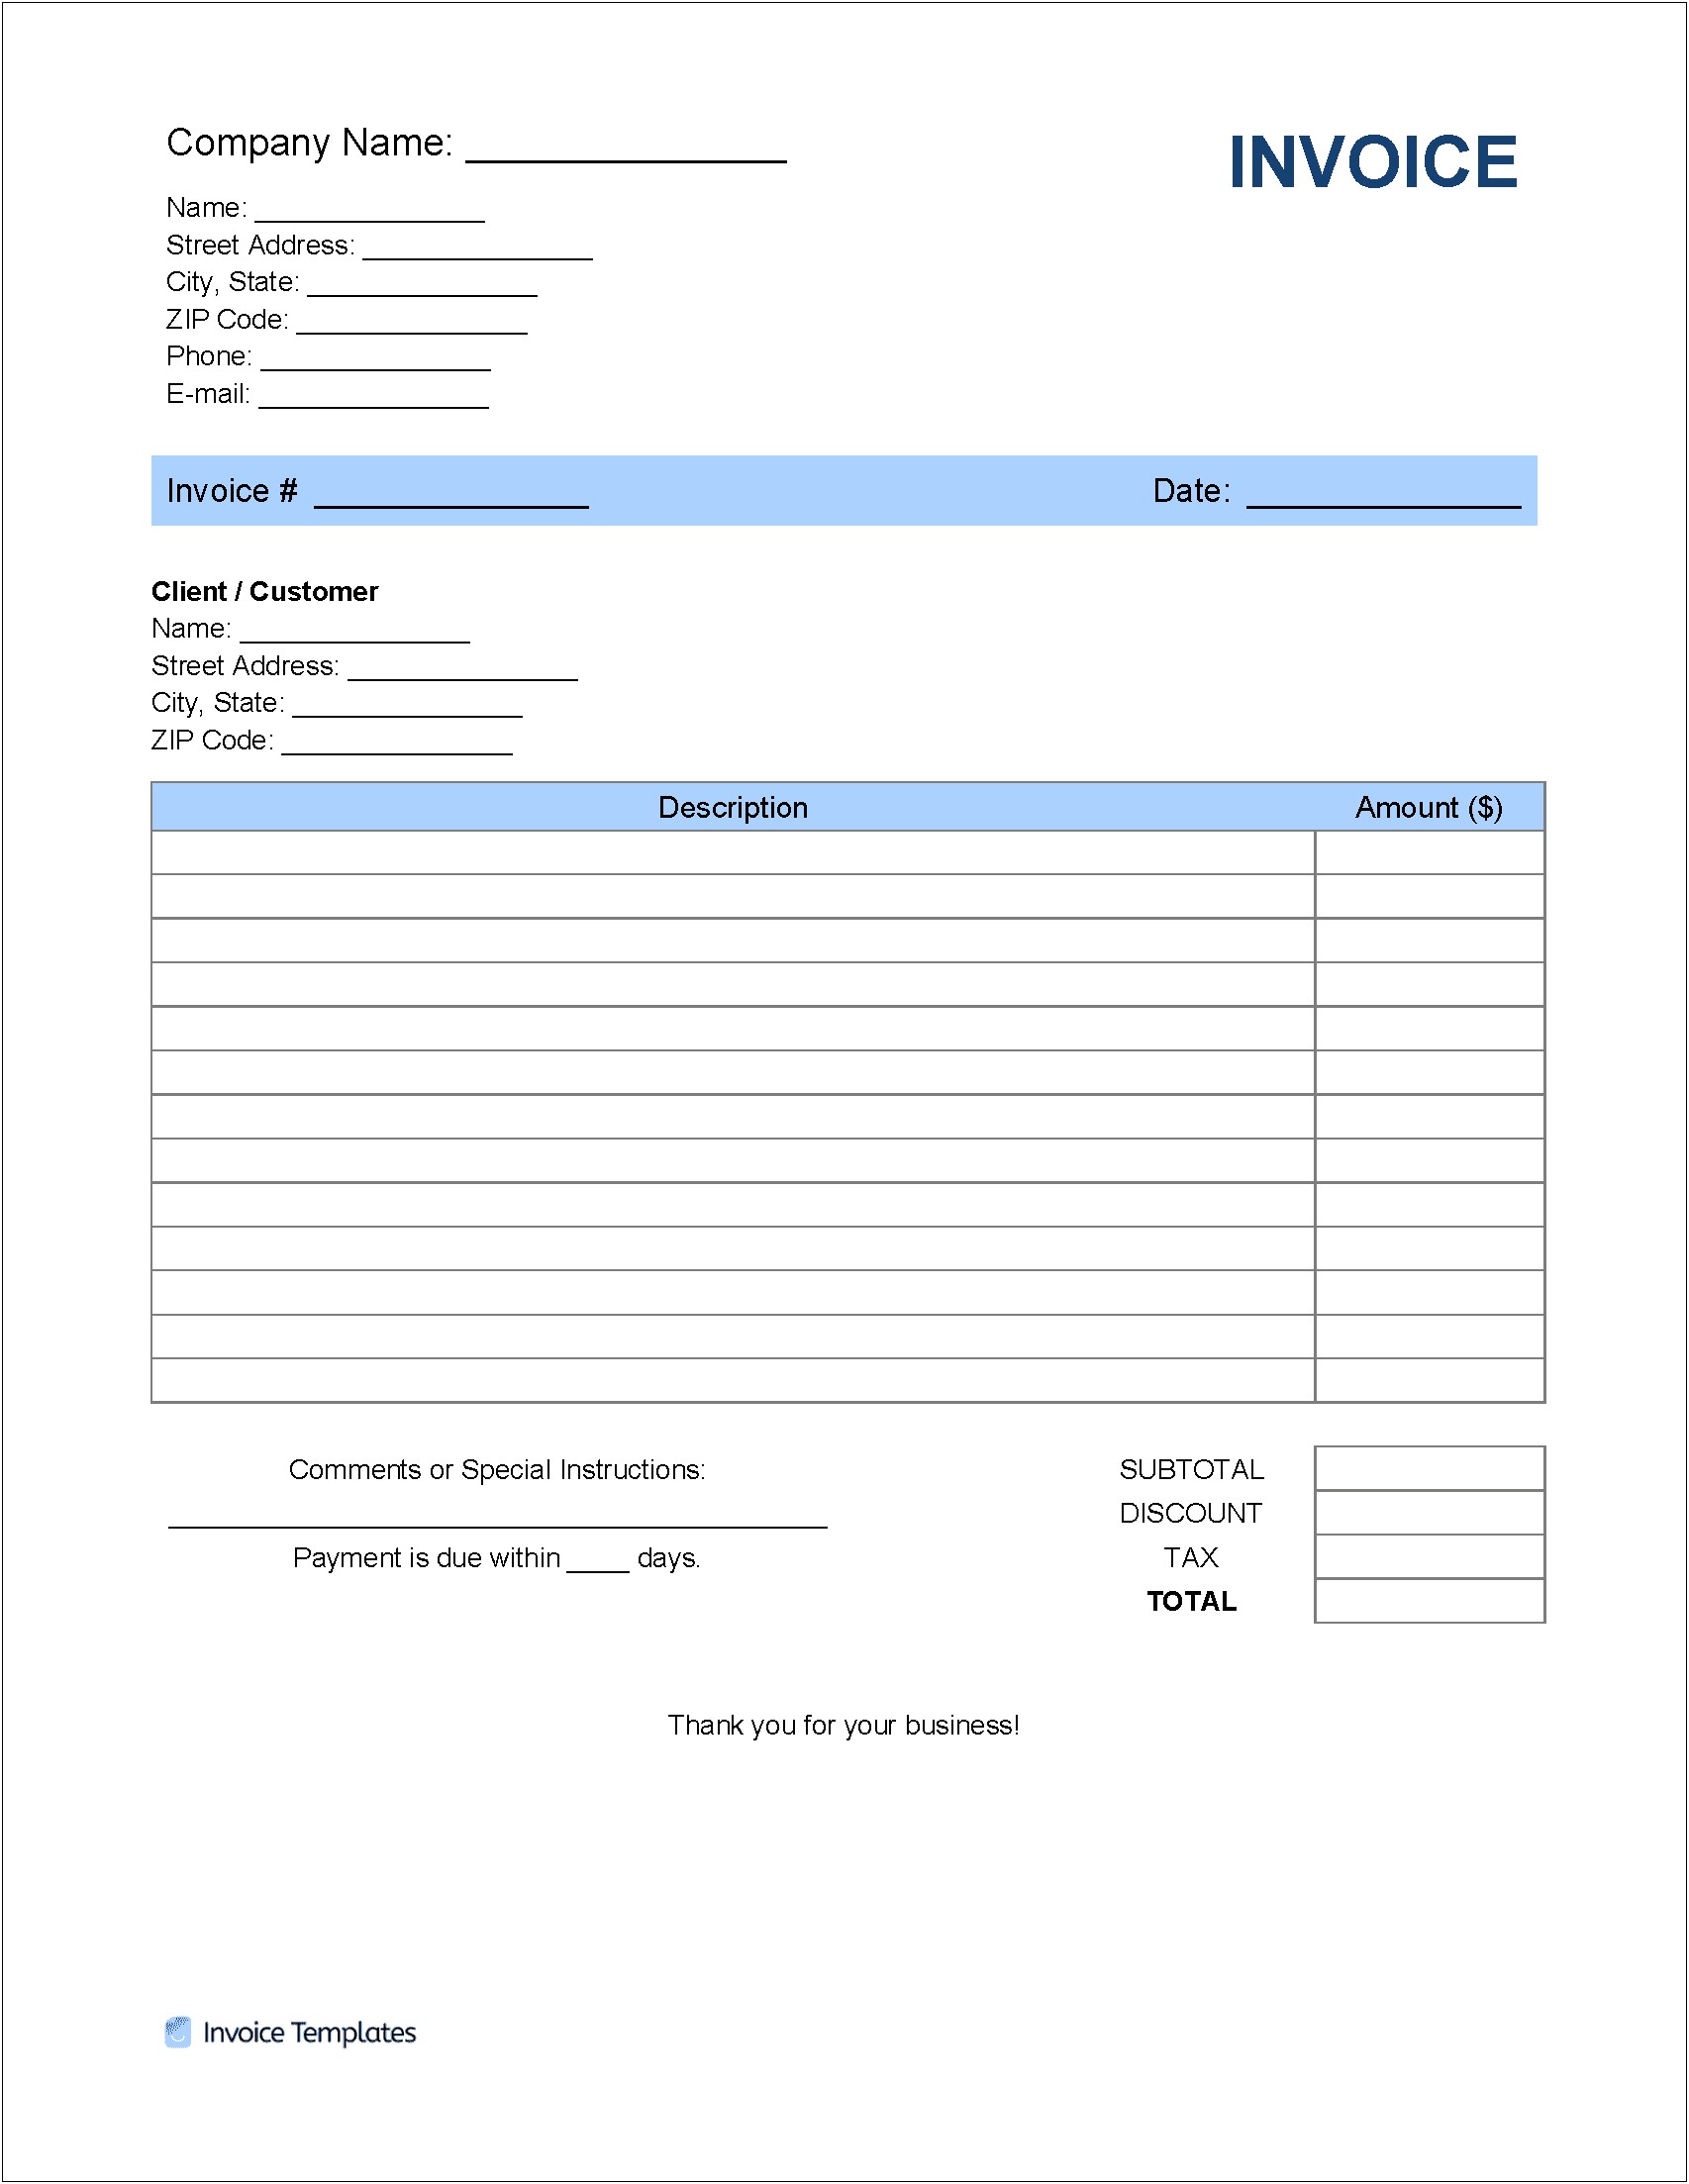 Free Download Of Blank Invoice Template For 1980s